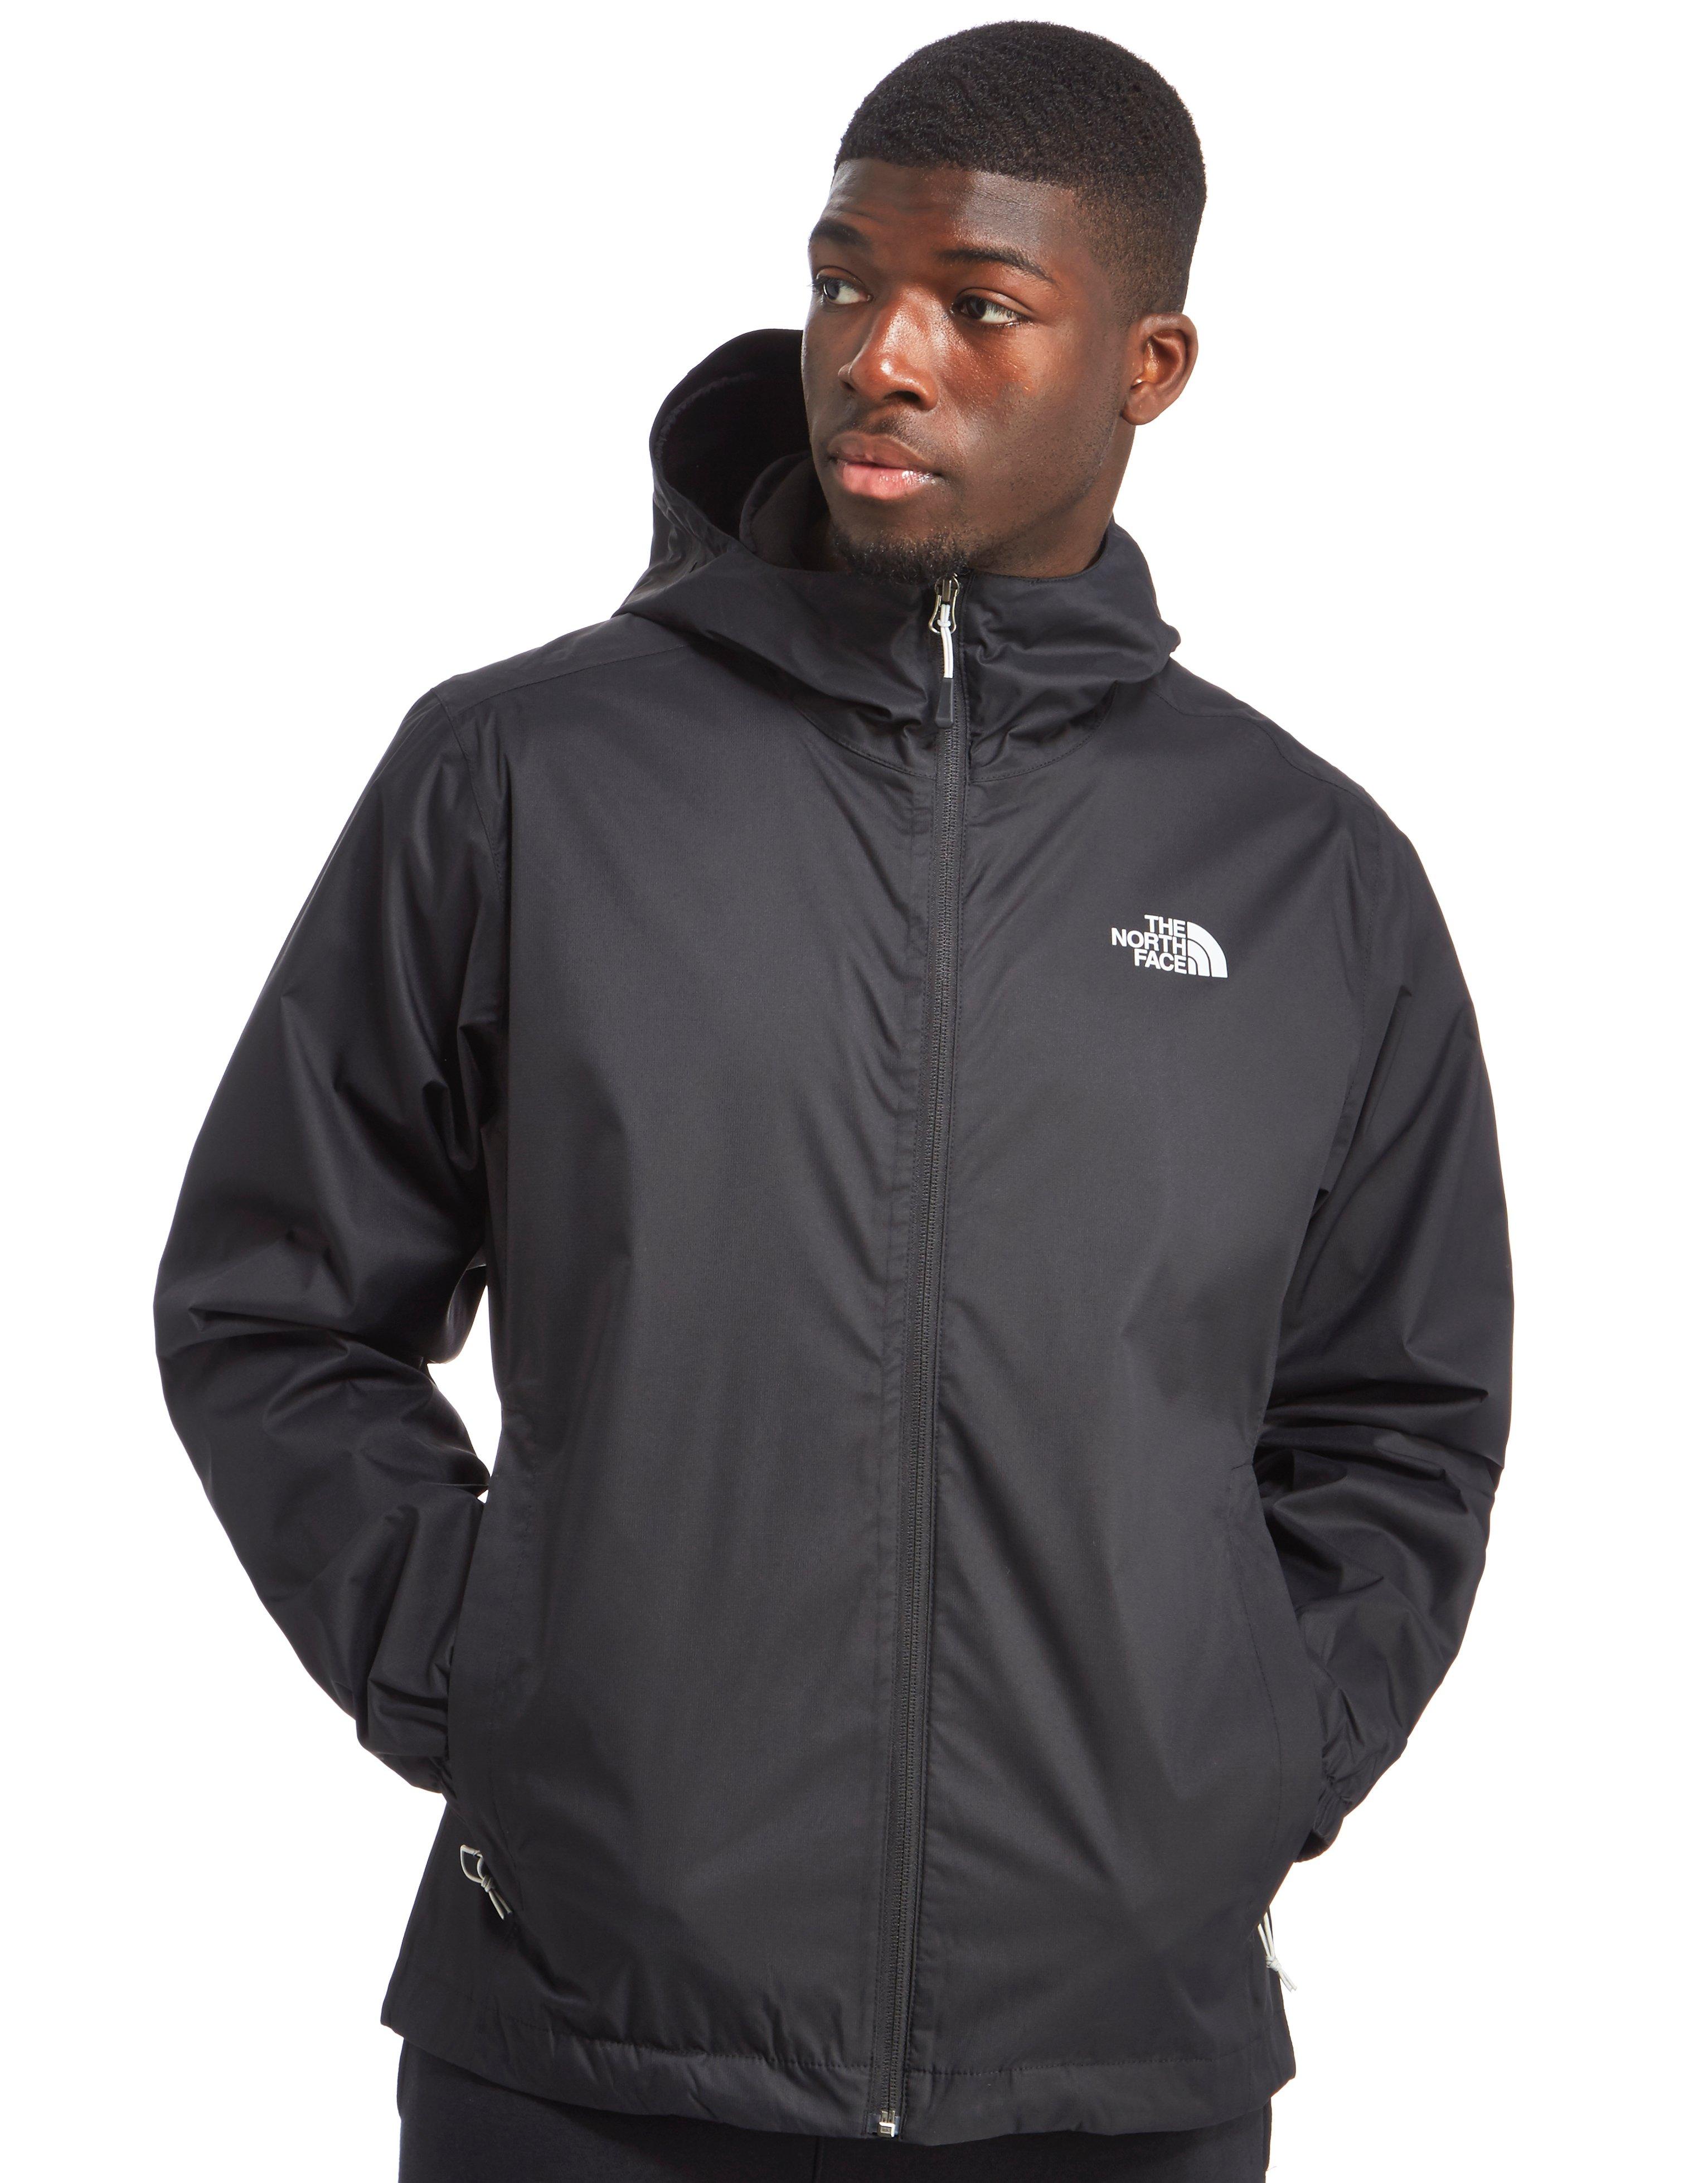 the north face mens down gilet bodywarmer jacket - Marwood ...